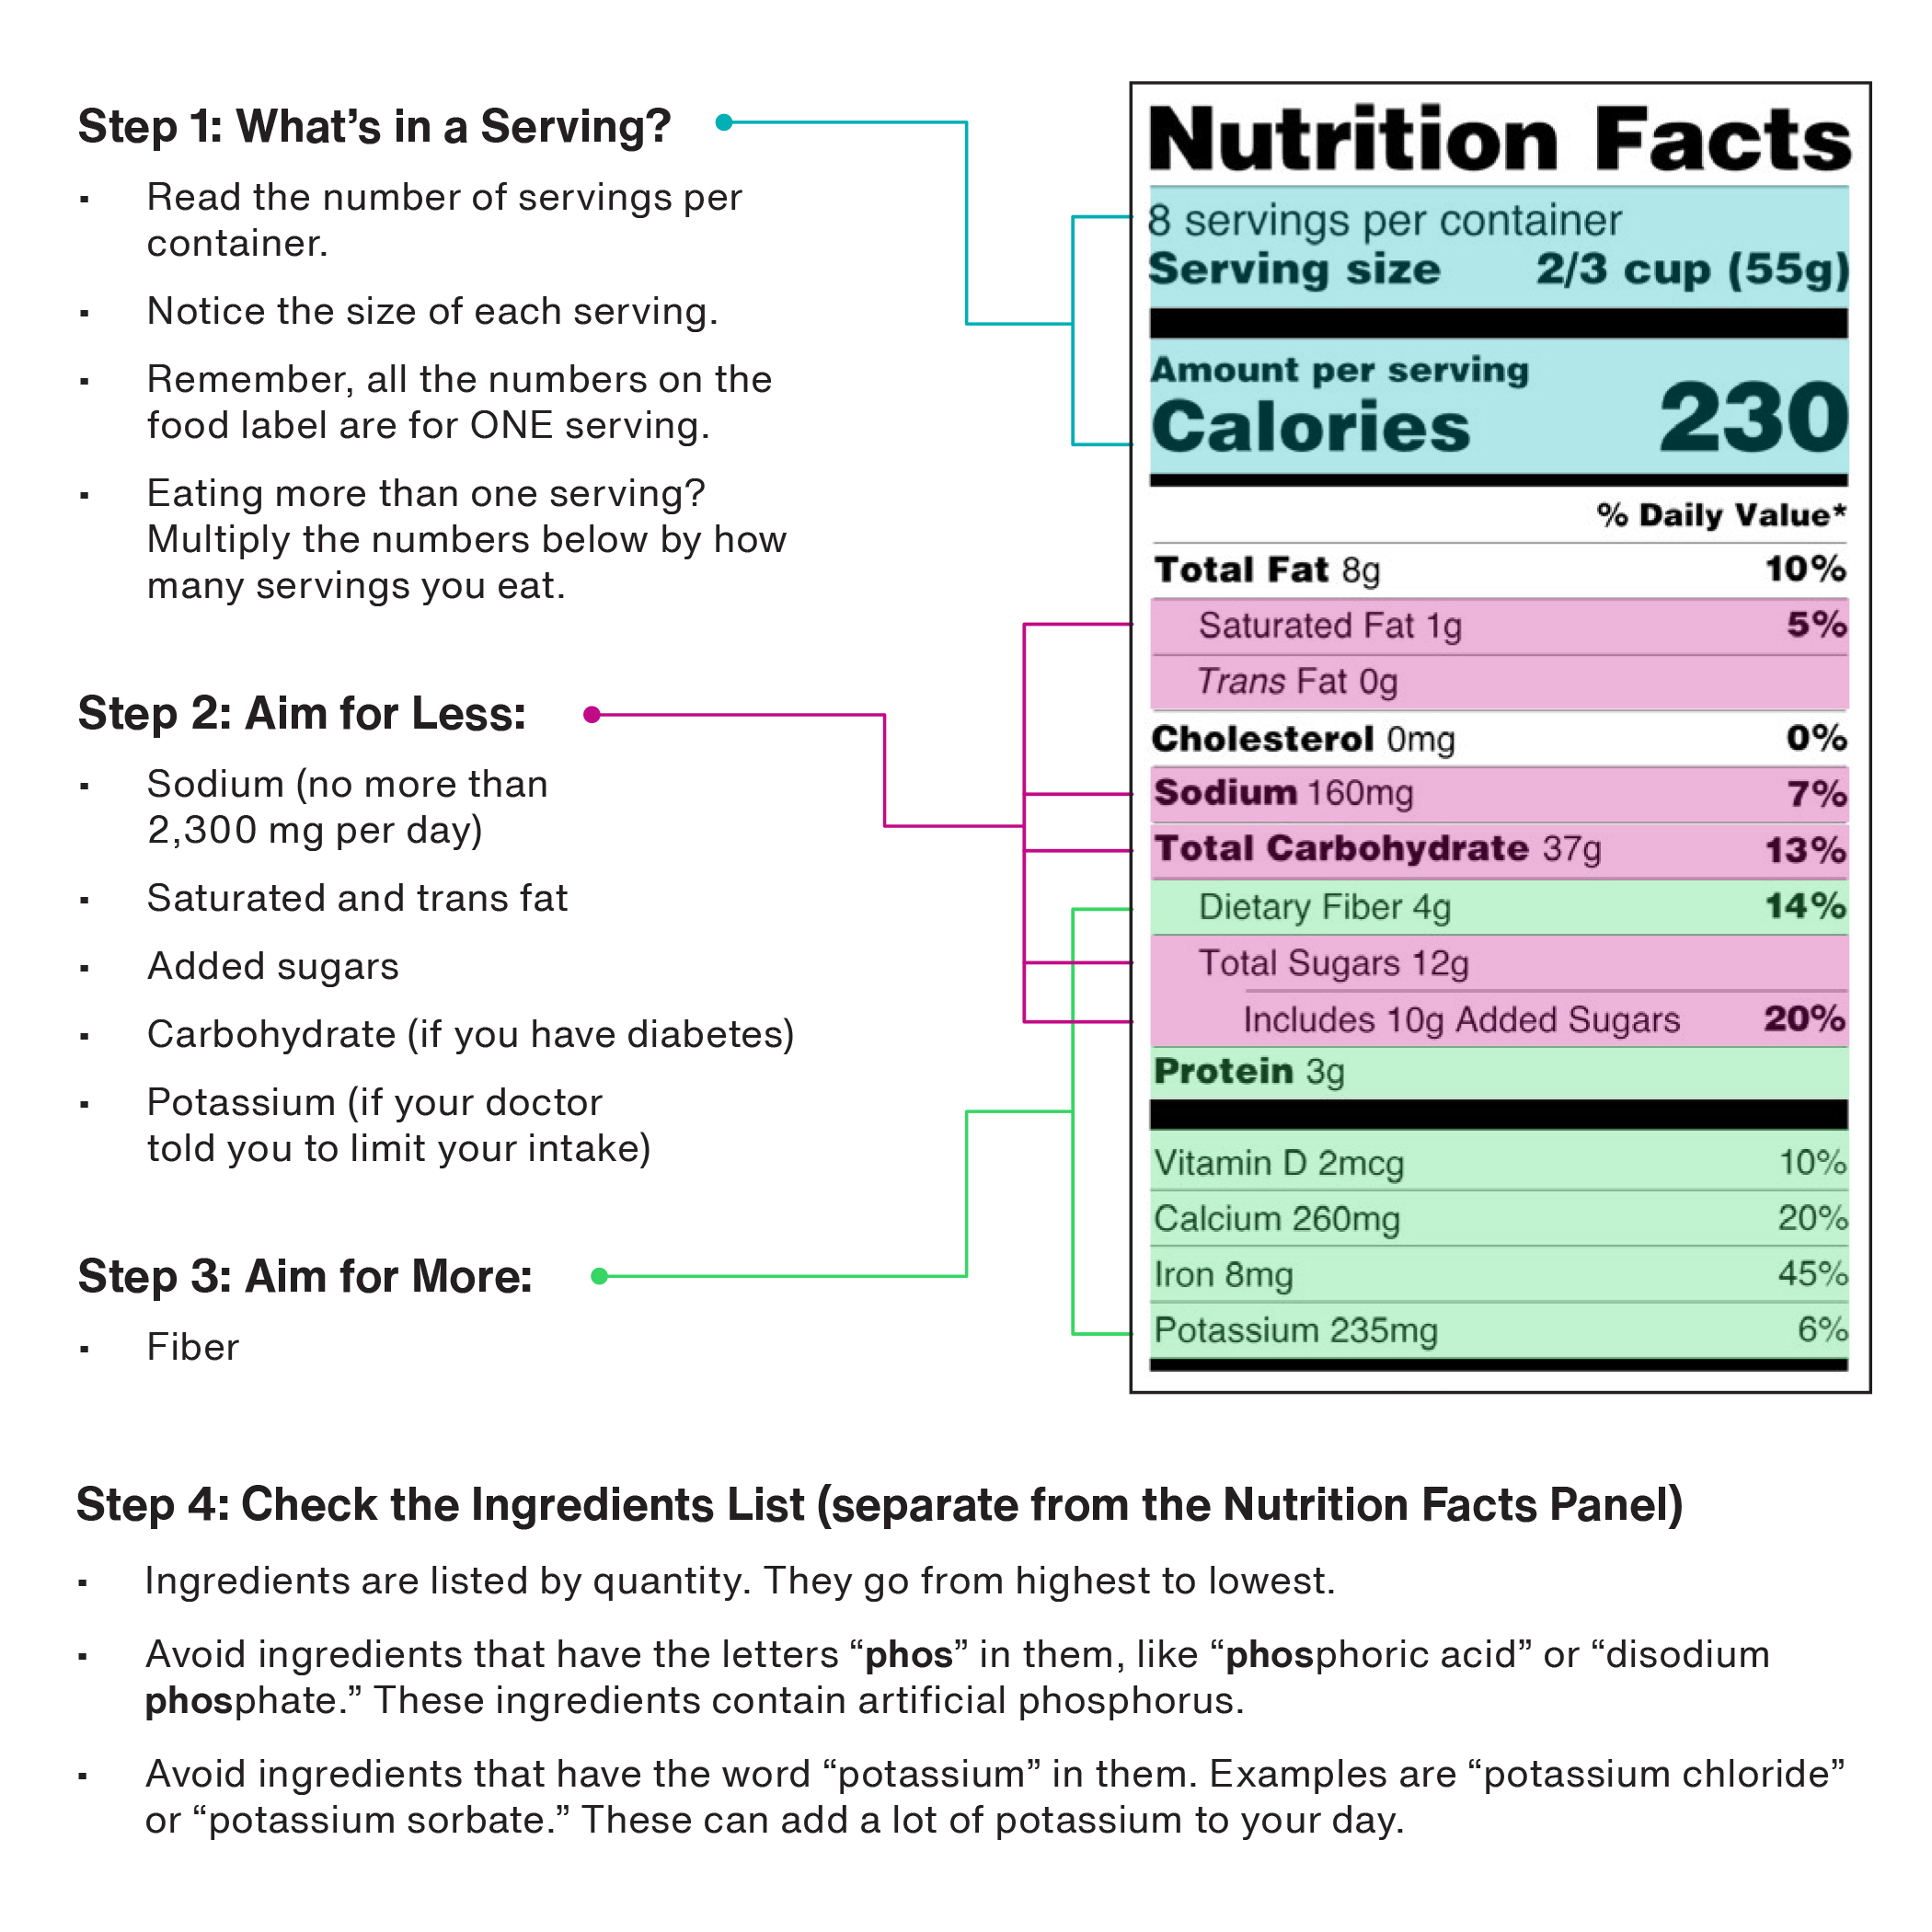 Nutrition_Facts_Guide_CKD.jpg